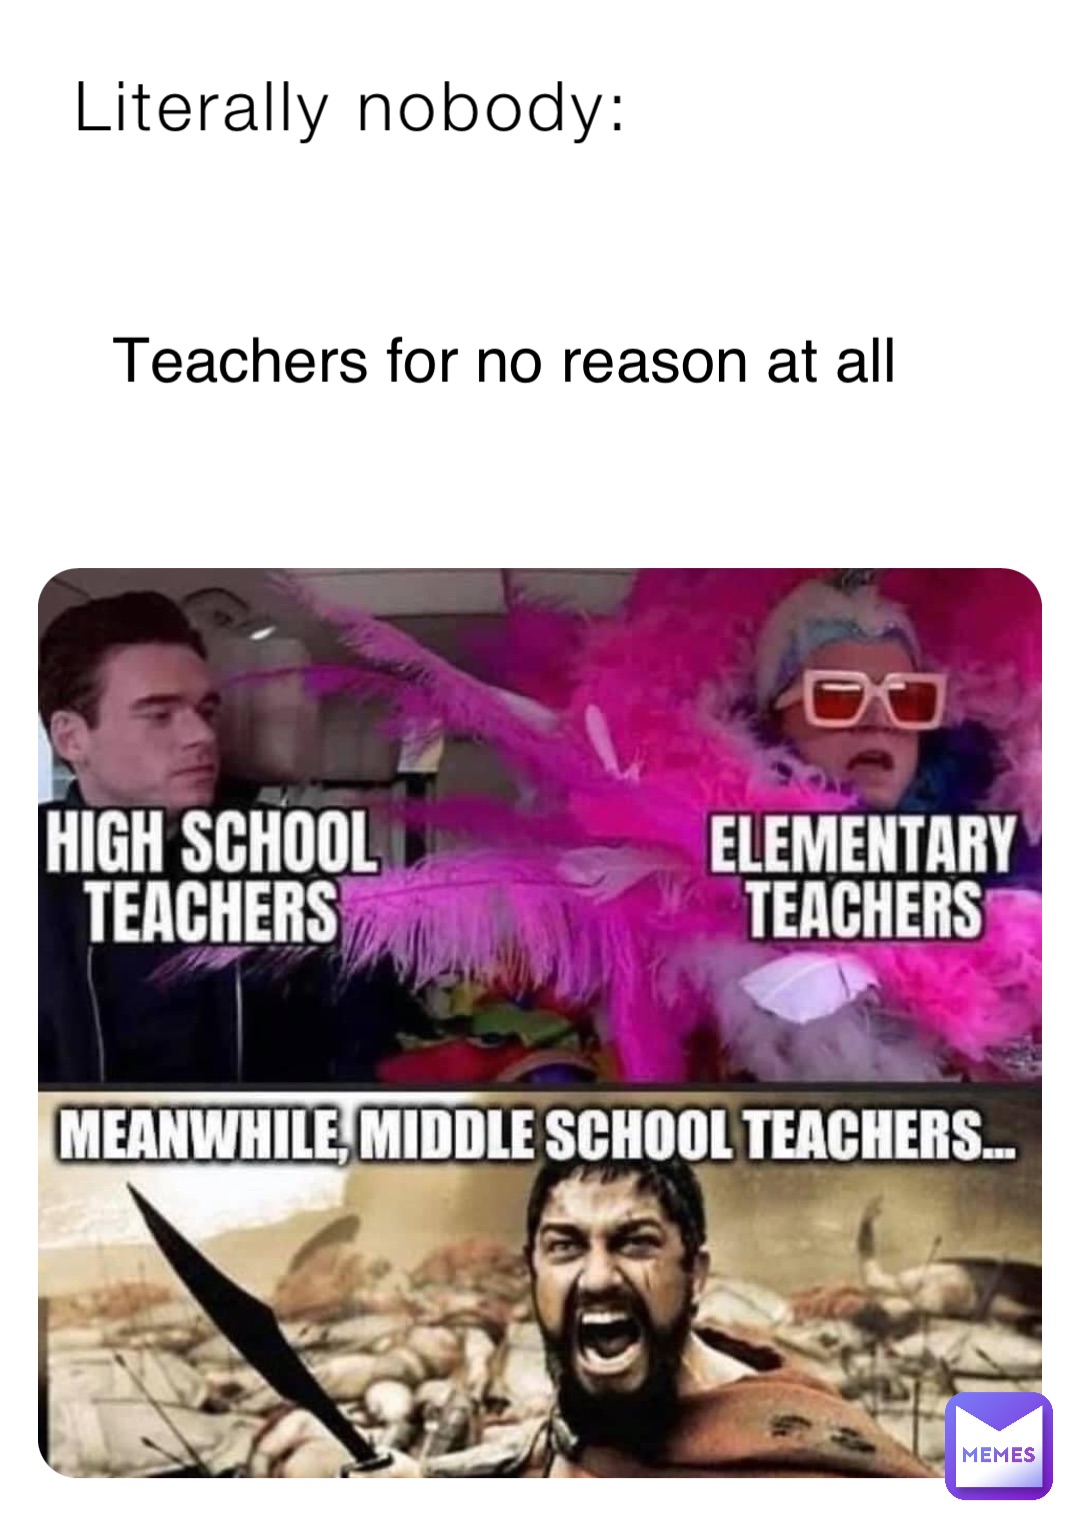 Literally nobody: Teachers for no reason at all